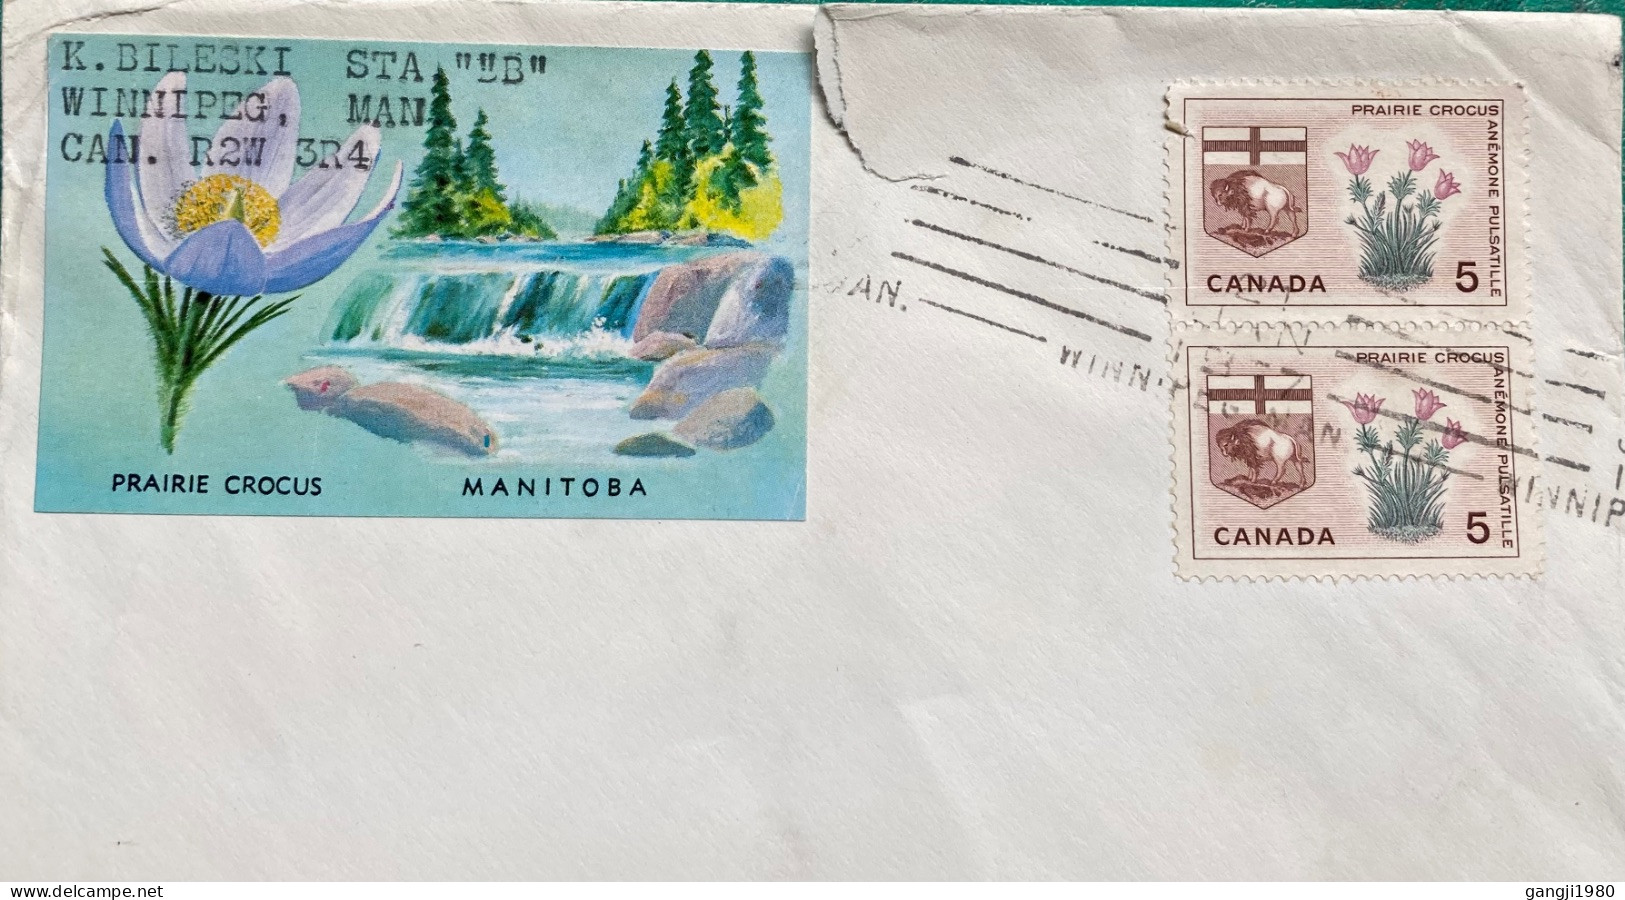 CANADA 1967, COVER USD TO USA, PROVINCE BADLE FLOWER, ANIMAL, NATURE, WATERFALL, 2 STAMP, WINNIPG CITY, BAR CANCEL. - Covers & Documents